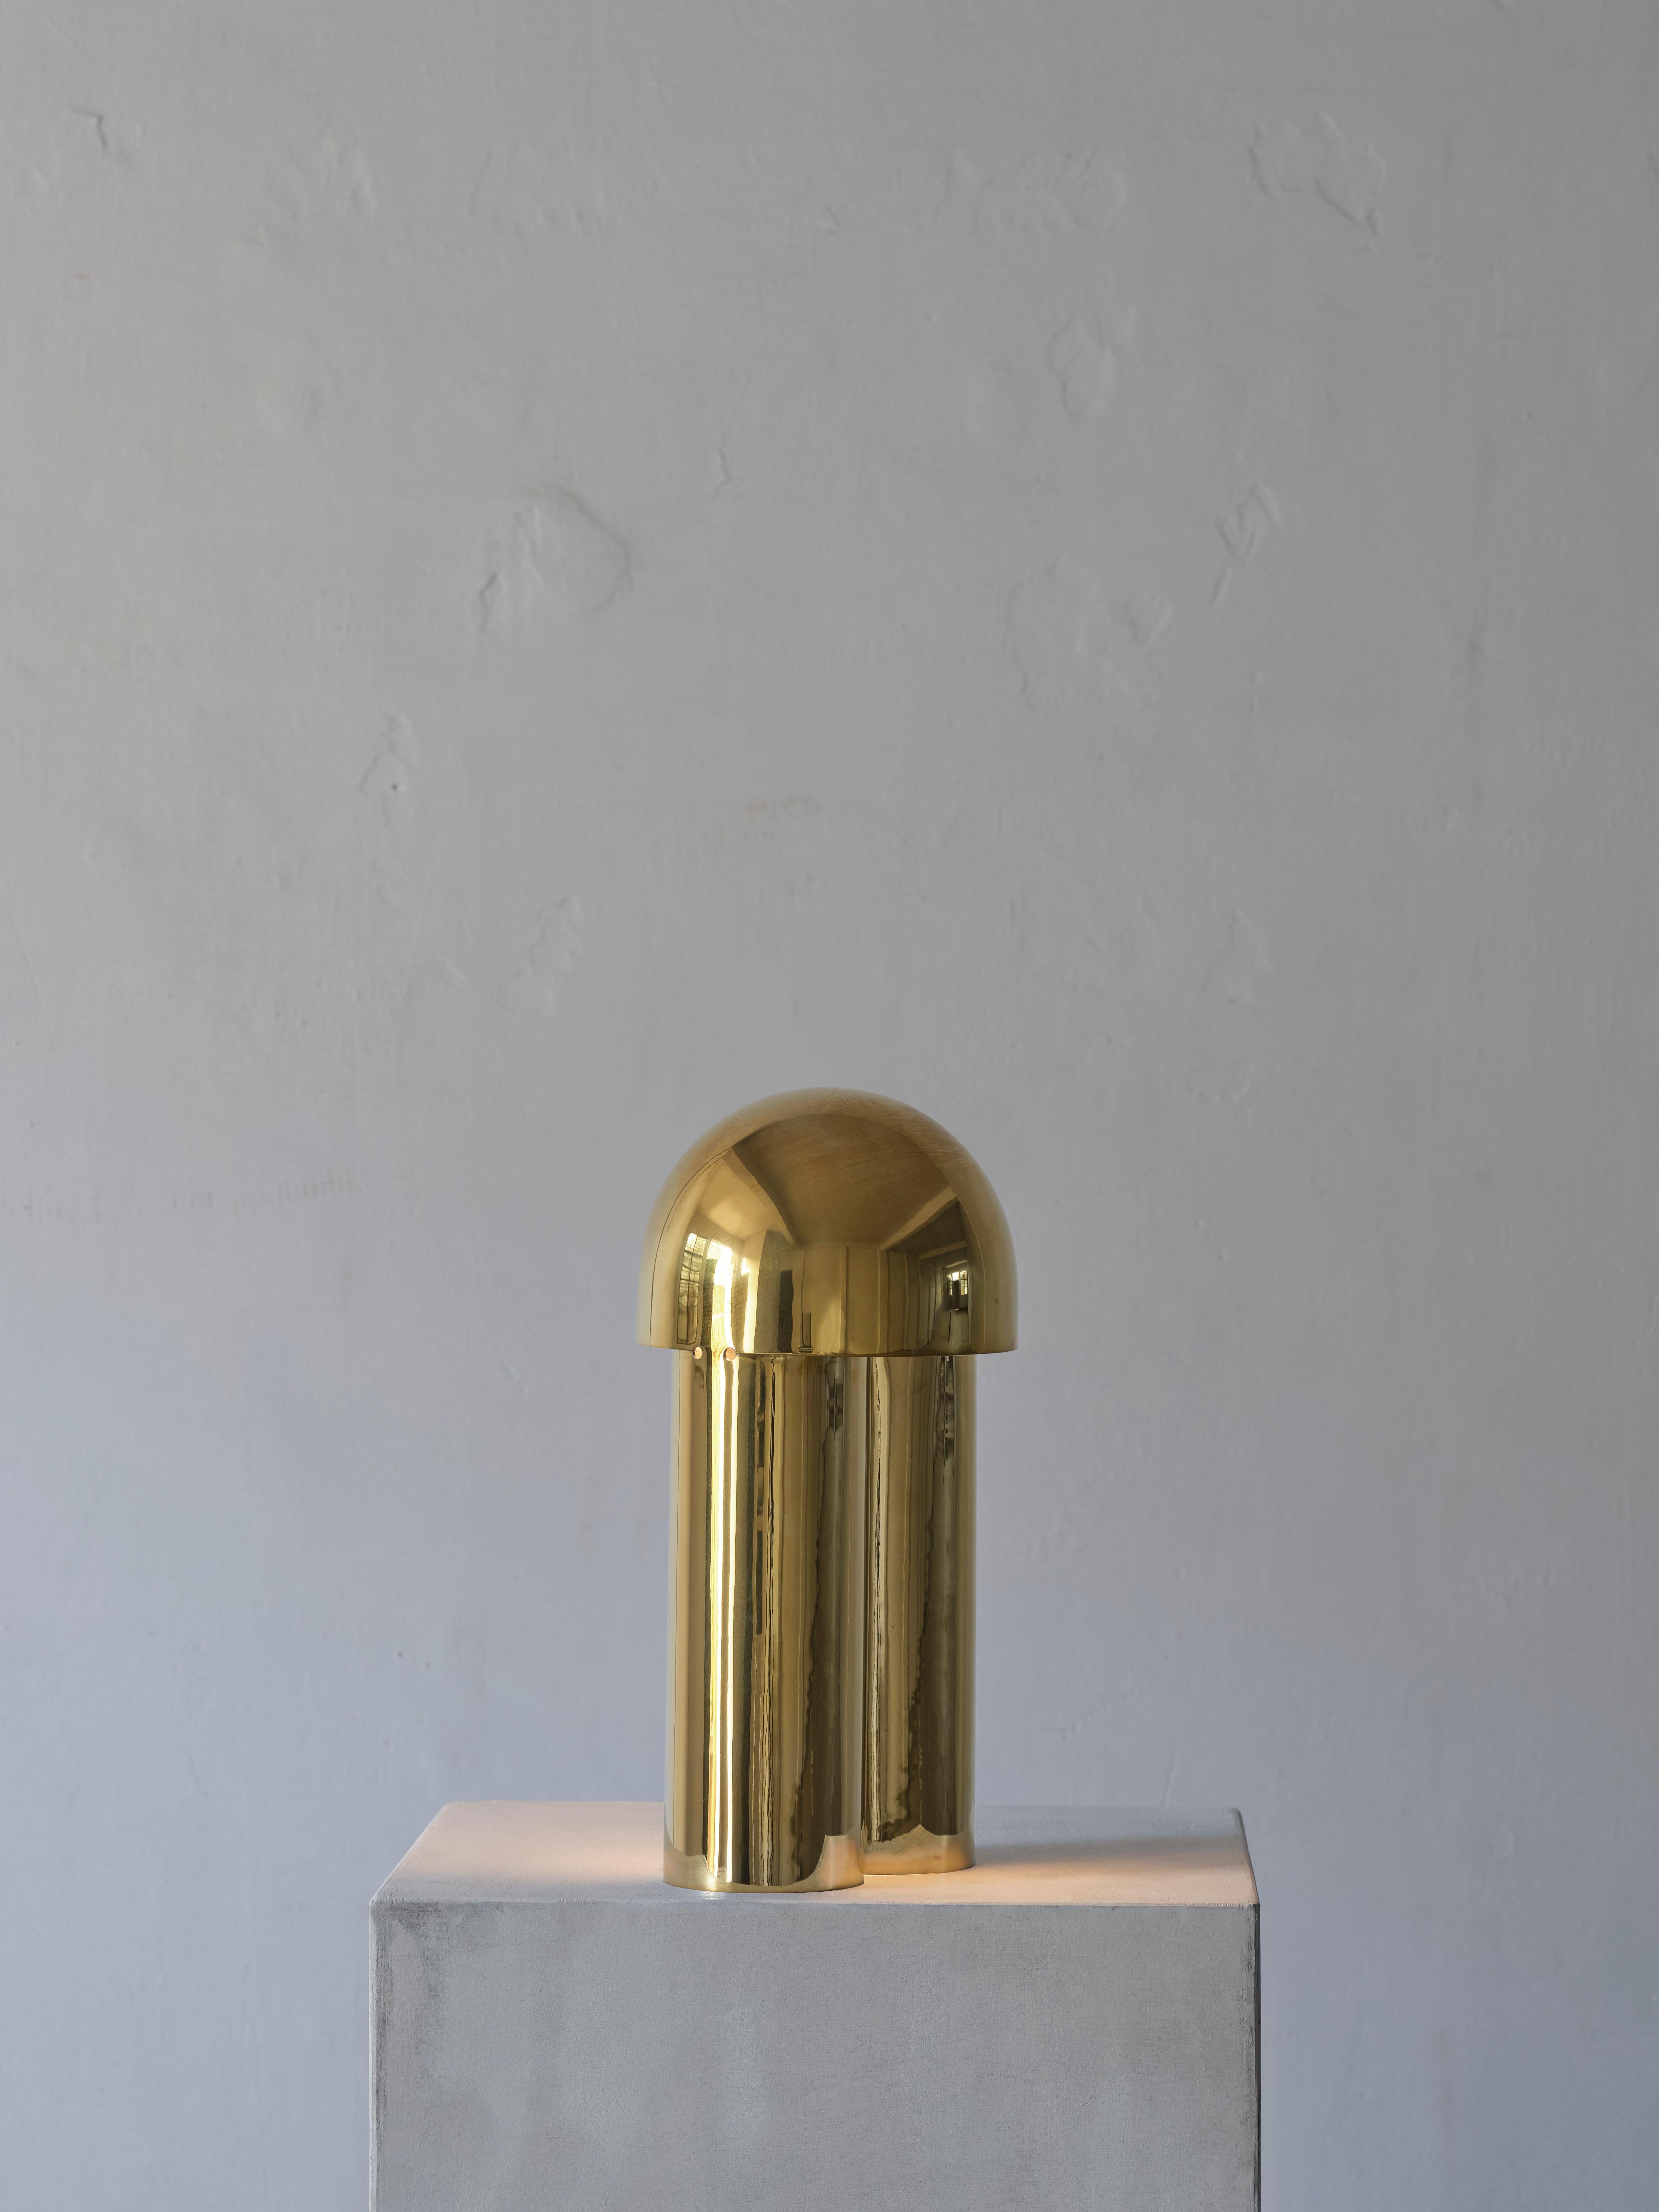 Monolith buffed brass sculpted table lamp by Paul Matter
Dimensions: H 419 mm x D 203.2 mm
Weight: 3 Kgs
Lamping: 1 type E14 base, 3W - 5W led, warm white
CE certified, voltage 220V - 240V
Dimmable upon request
Materials: Brass

Custom finishes:
1.